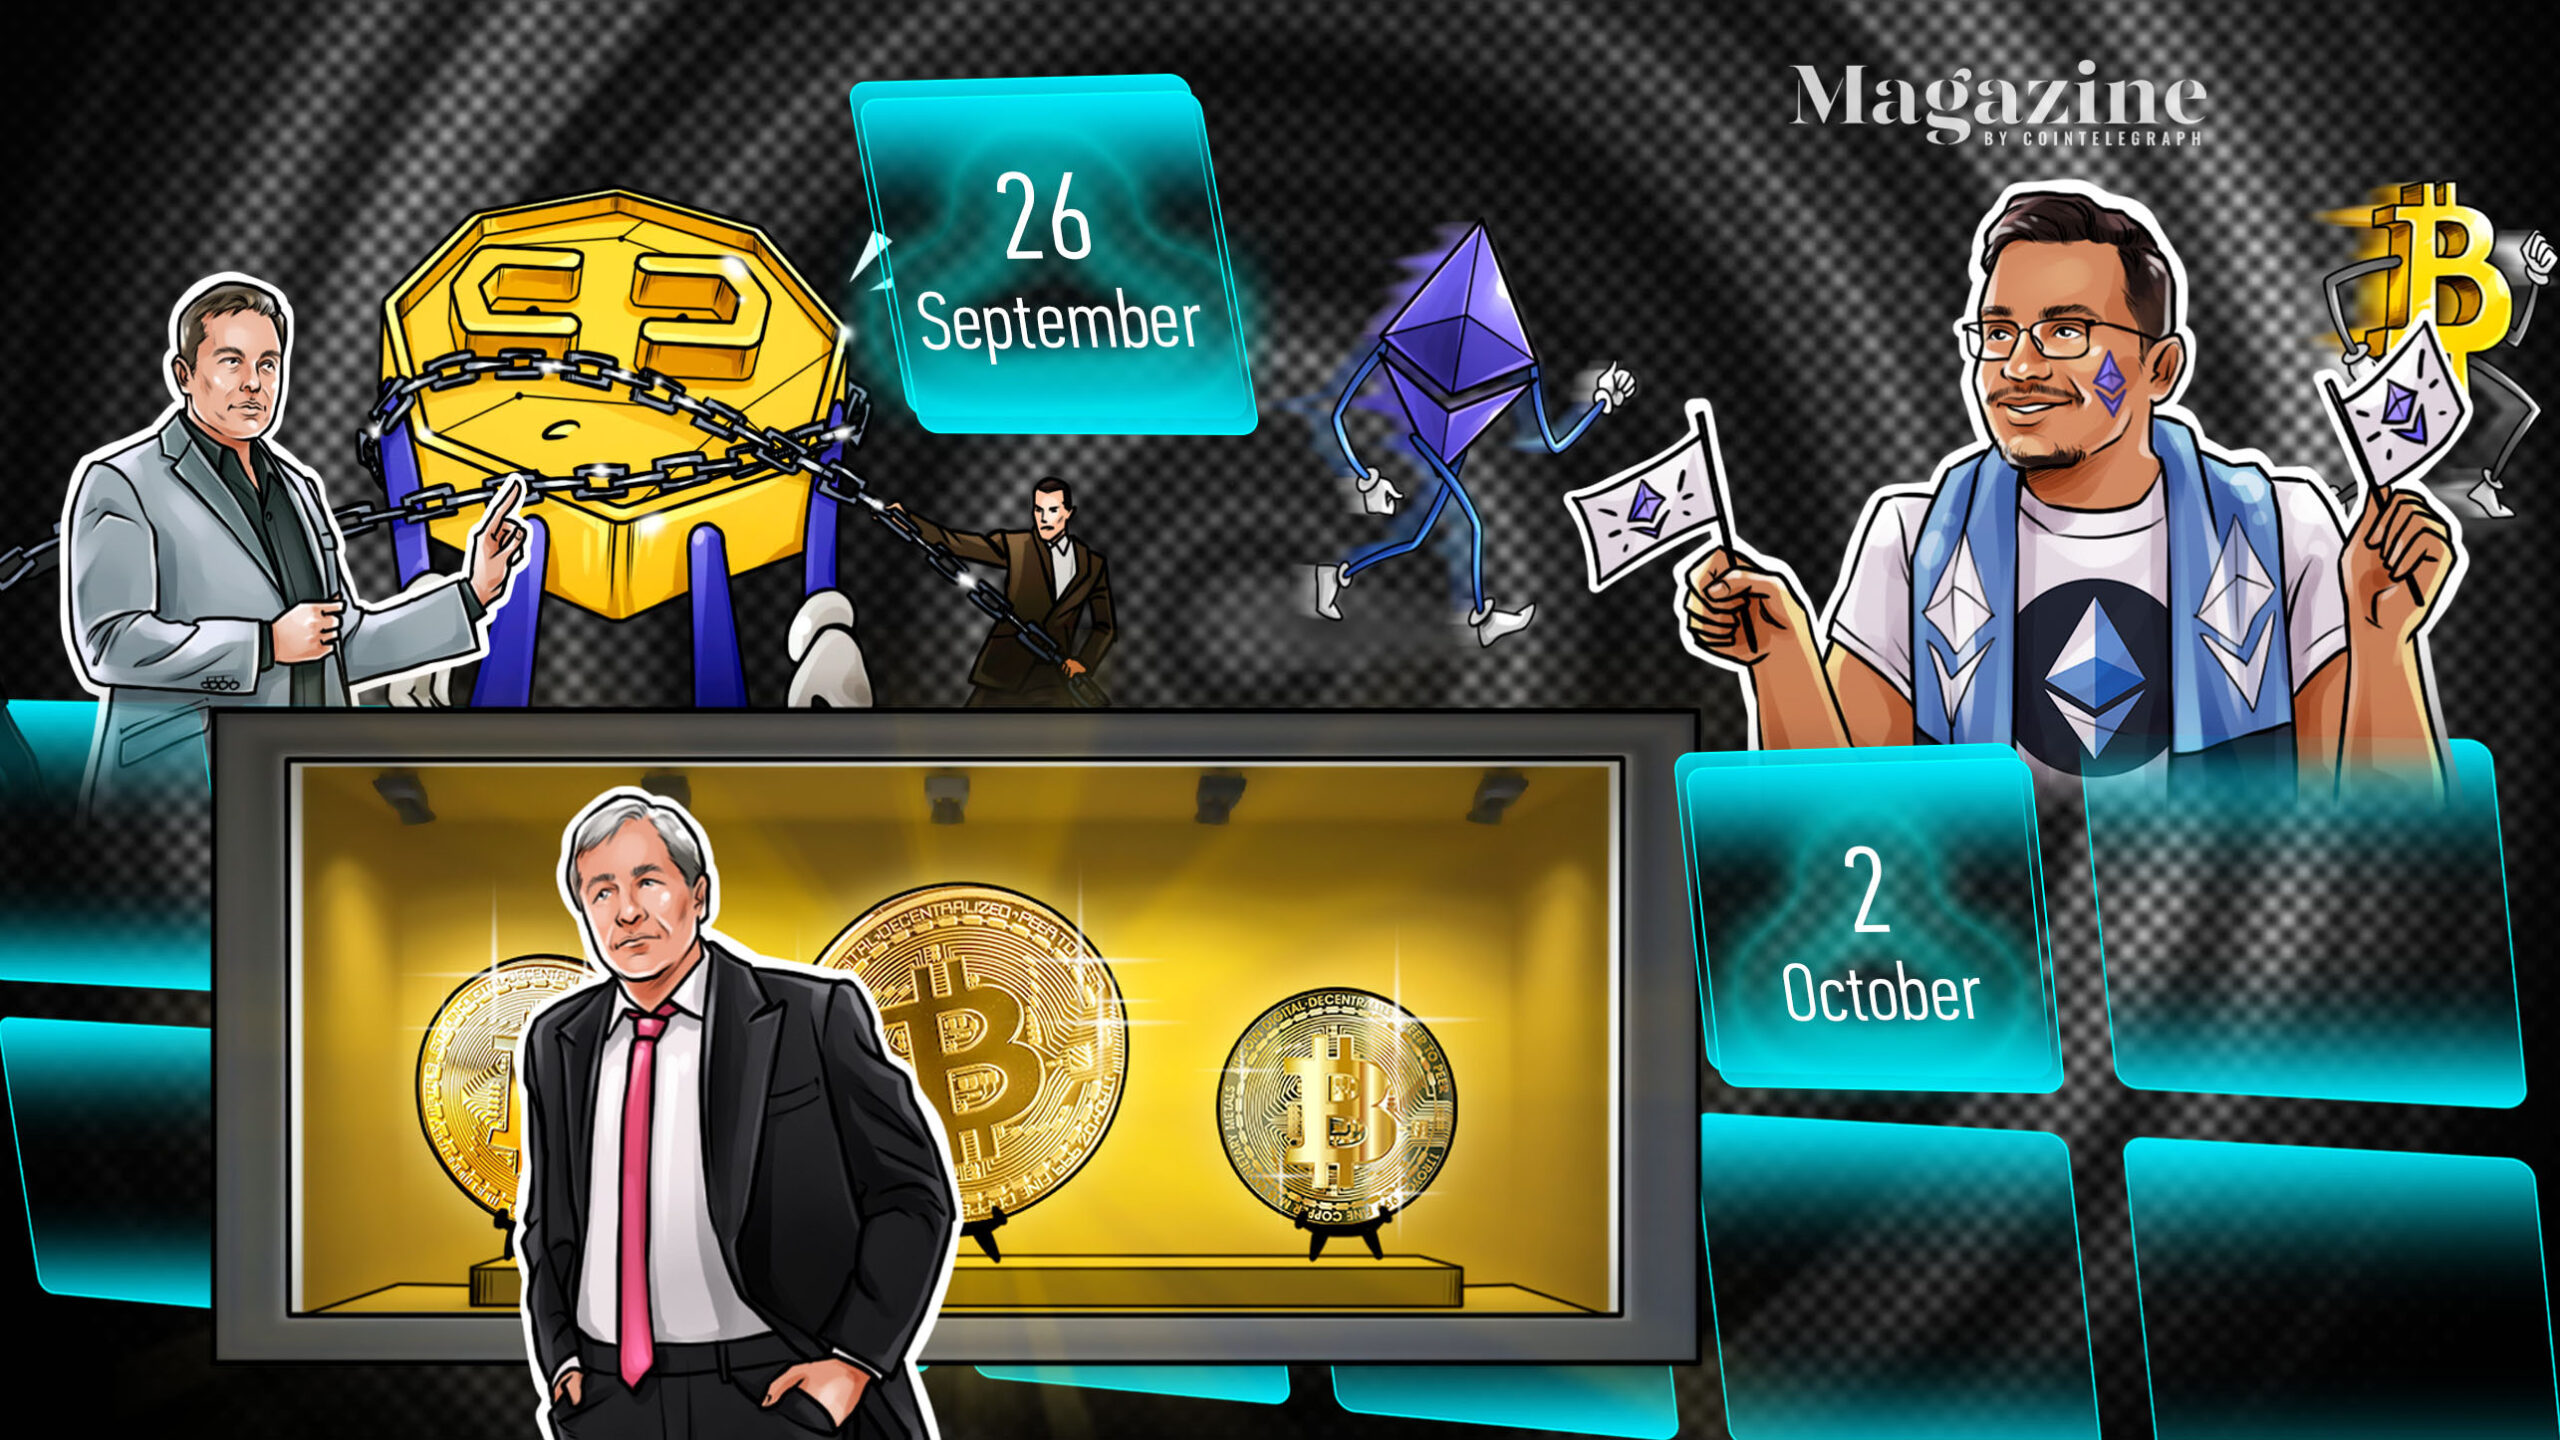 Morgan Stanley acquires more GBTC, Alibaba to halt crypto mining gear sales, and a possible scenario for $6 million BTC: Hodler’s Digest, Sept. 26